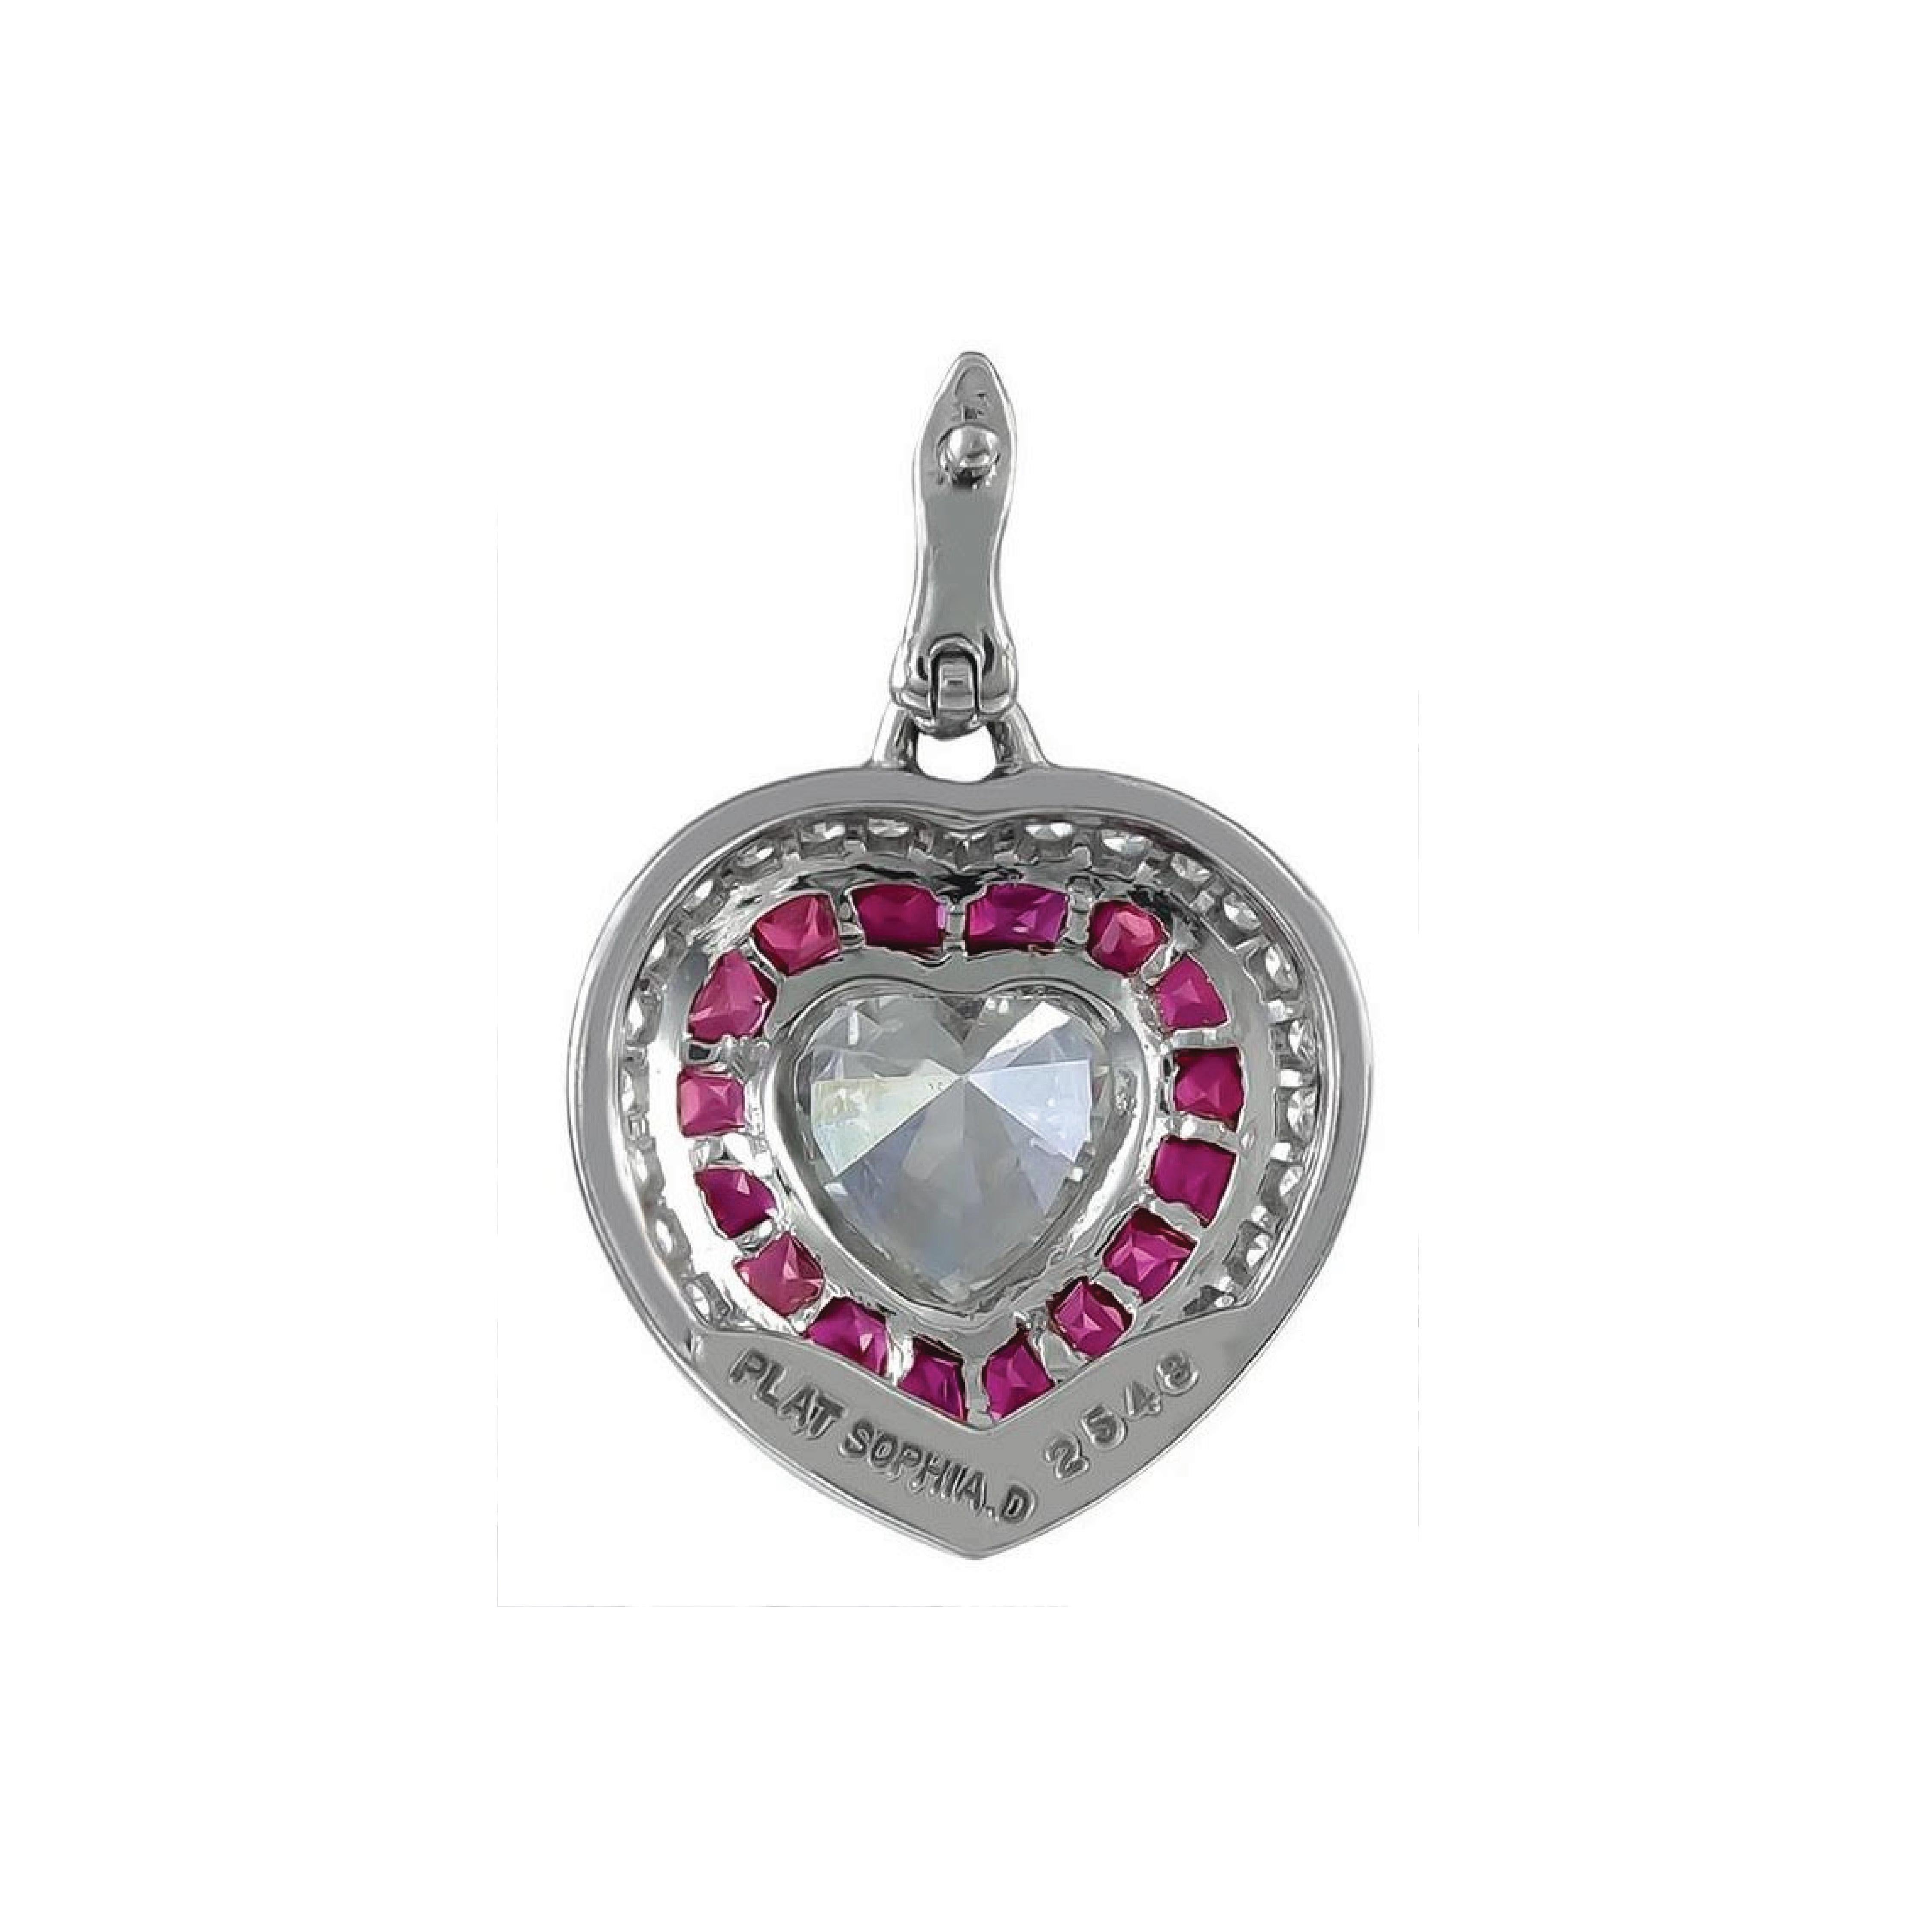 Gorgeous Art Deco inspired platinum set pendant by Sophia D. consisting of a 0.80 carat heart shaped diamond in the center and French cut rubies weighing 0.63 carats along with 0.32 carats of Diamonds. 

Sophia D by Joseph Dardashti LTD has been